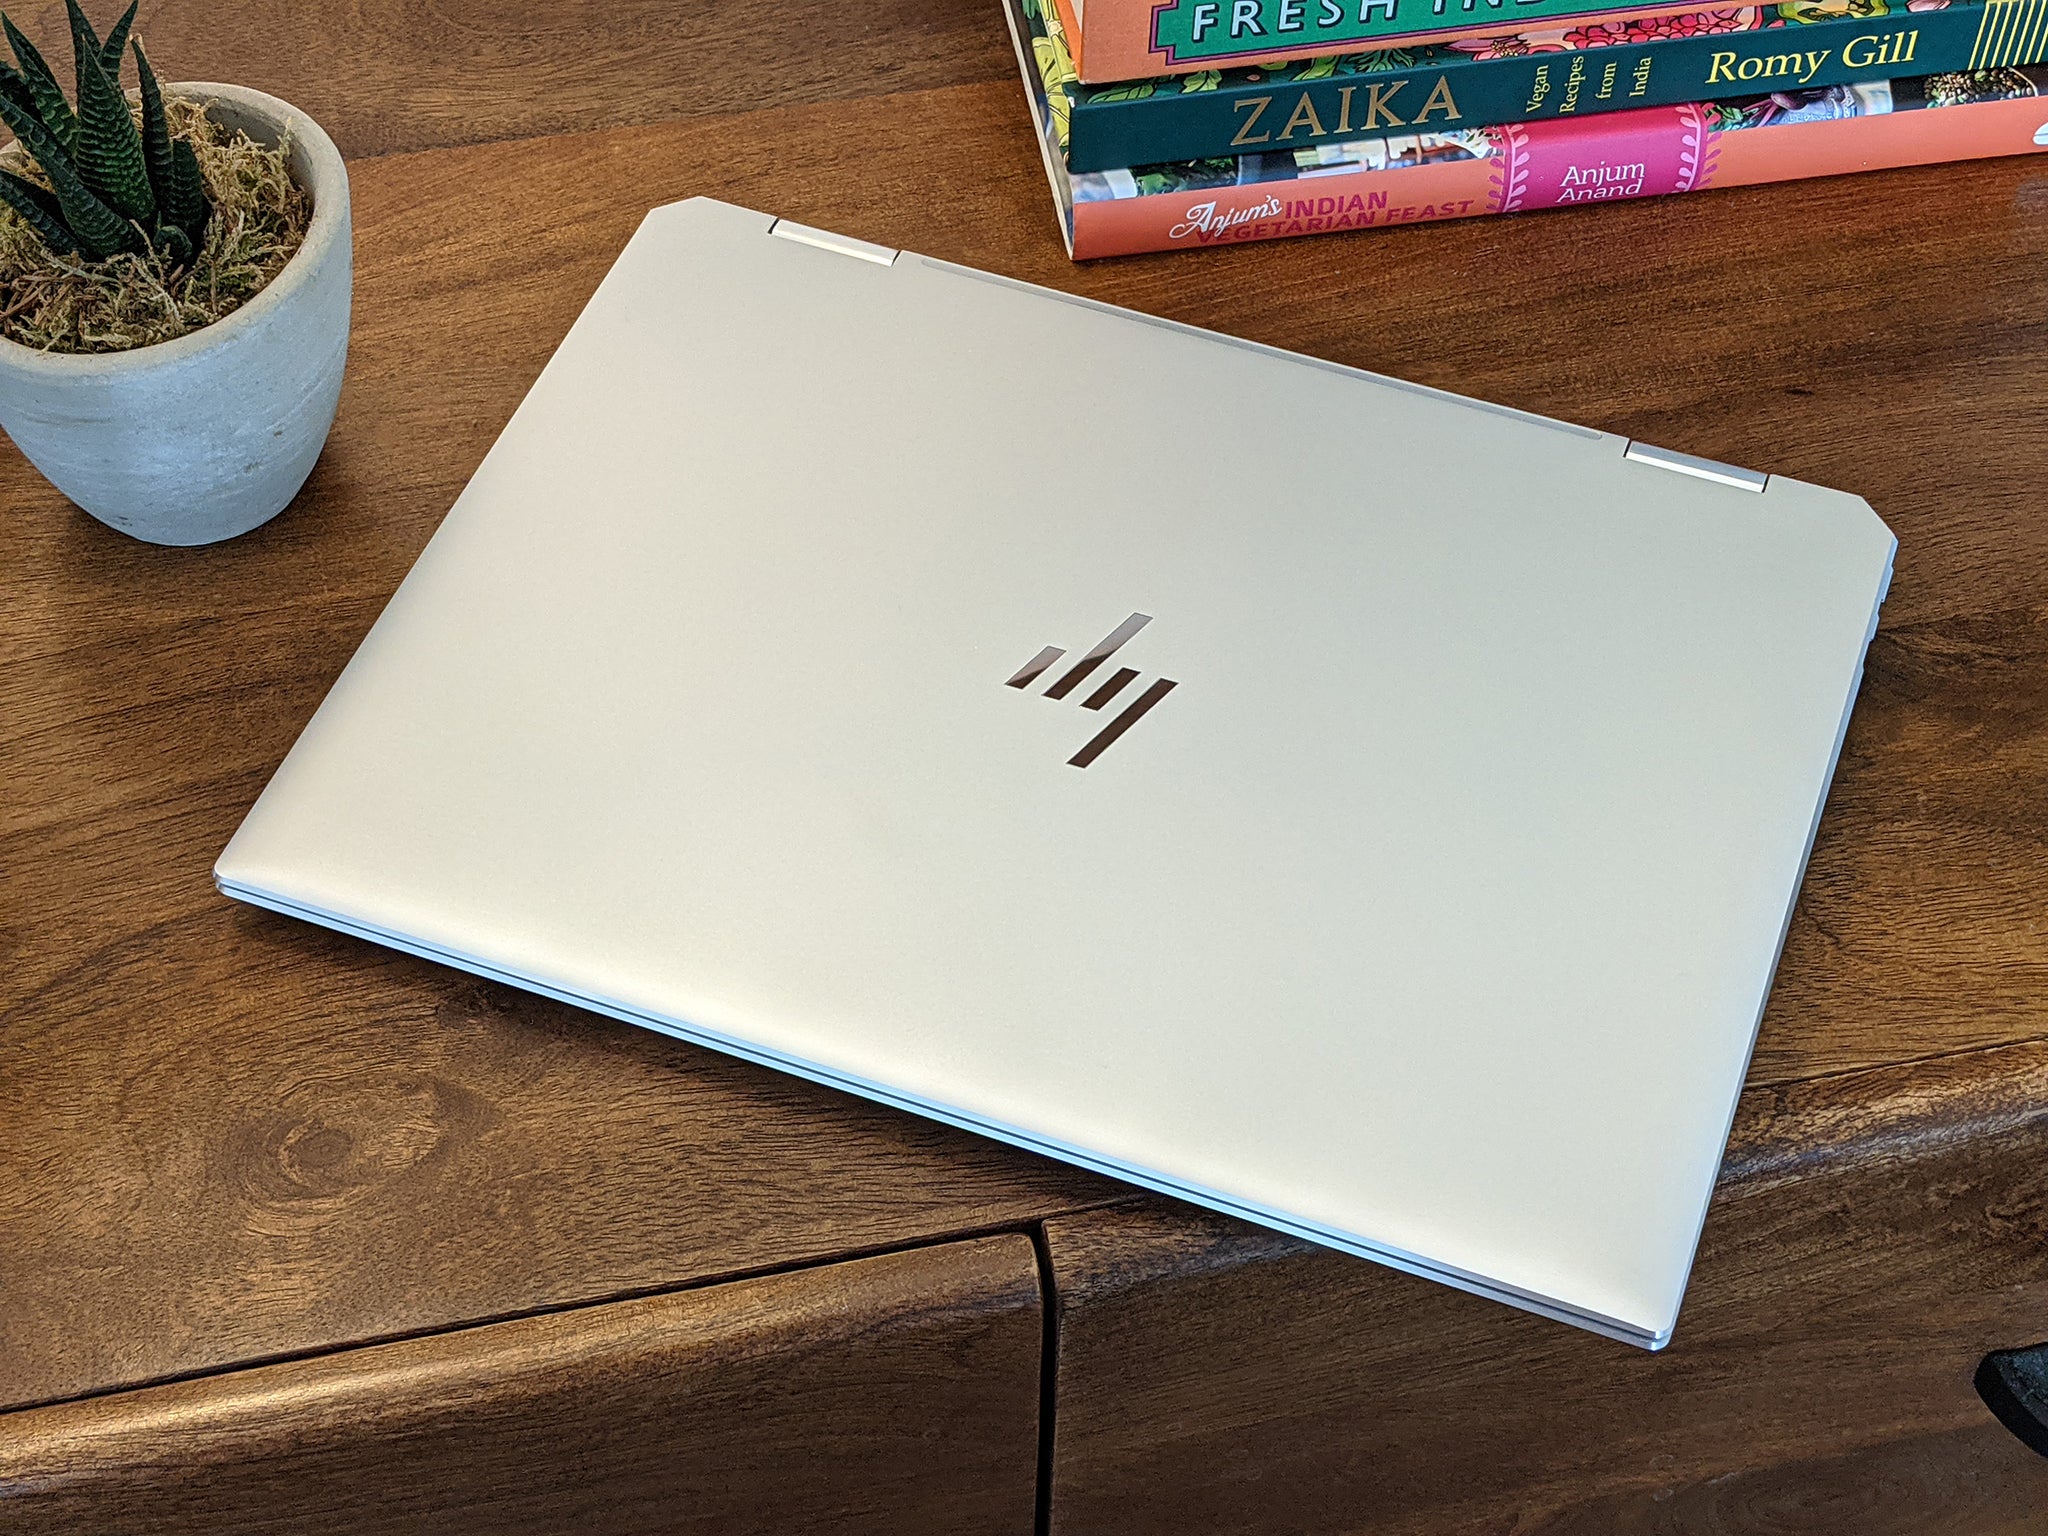 At 1.3kg, the HP spectre x360 is light, but sturdy enough to throw in a rucksack